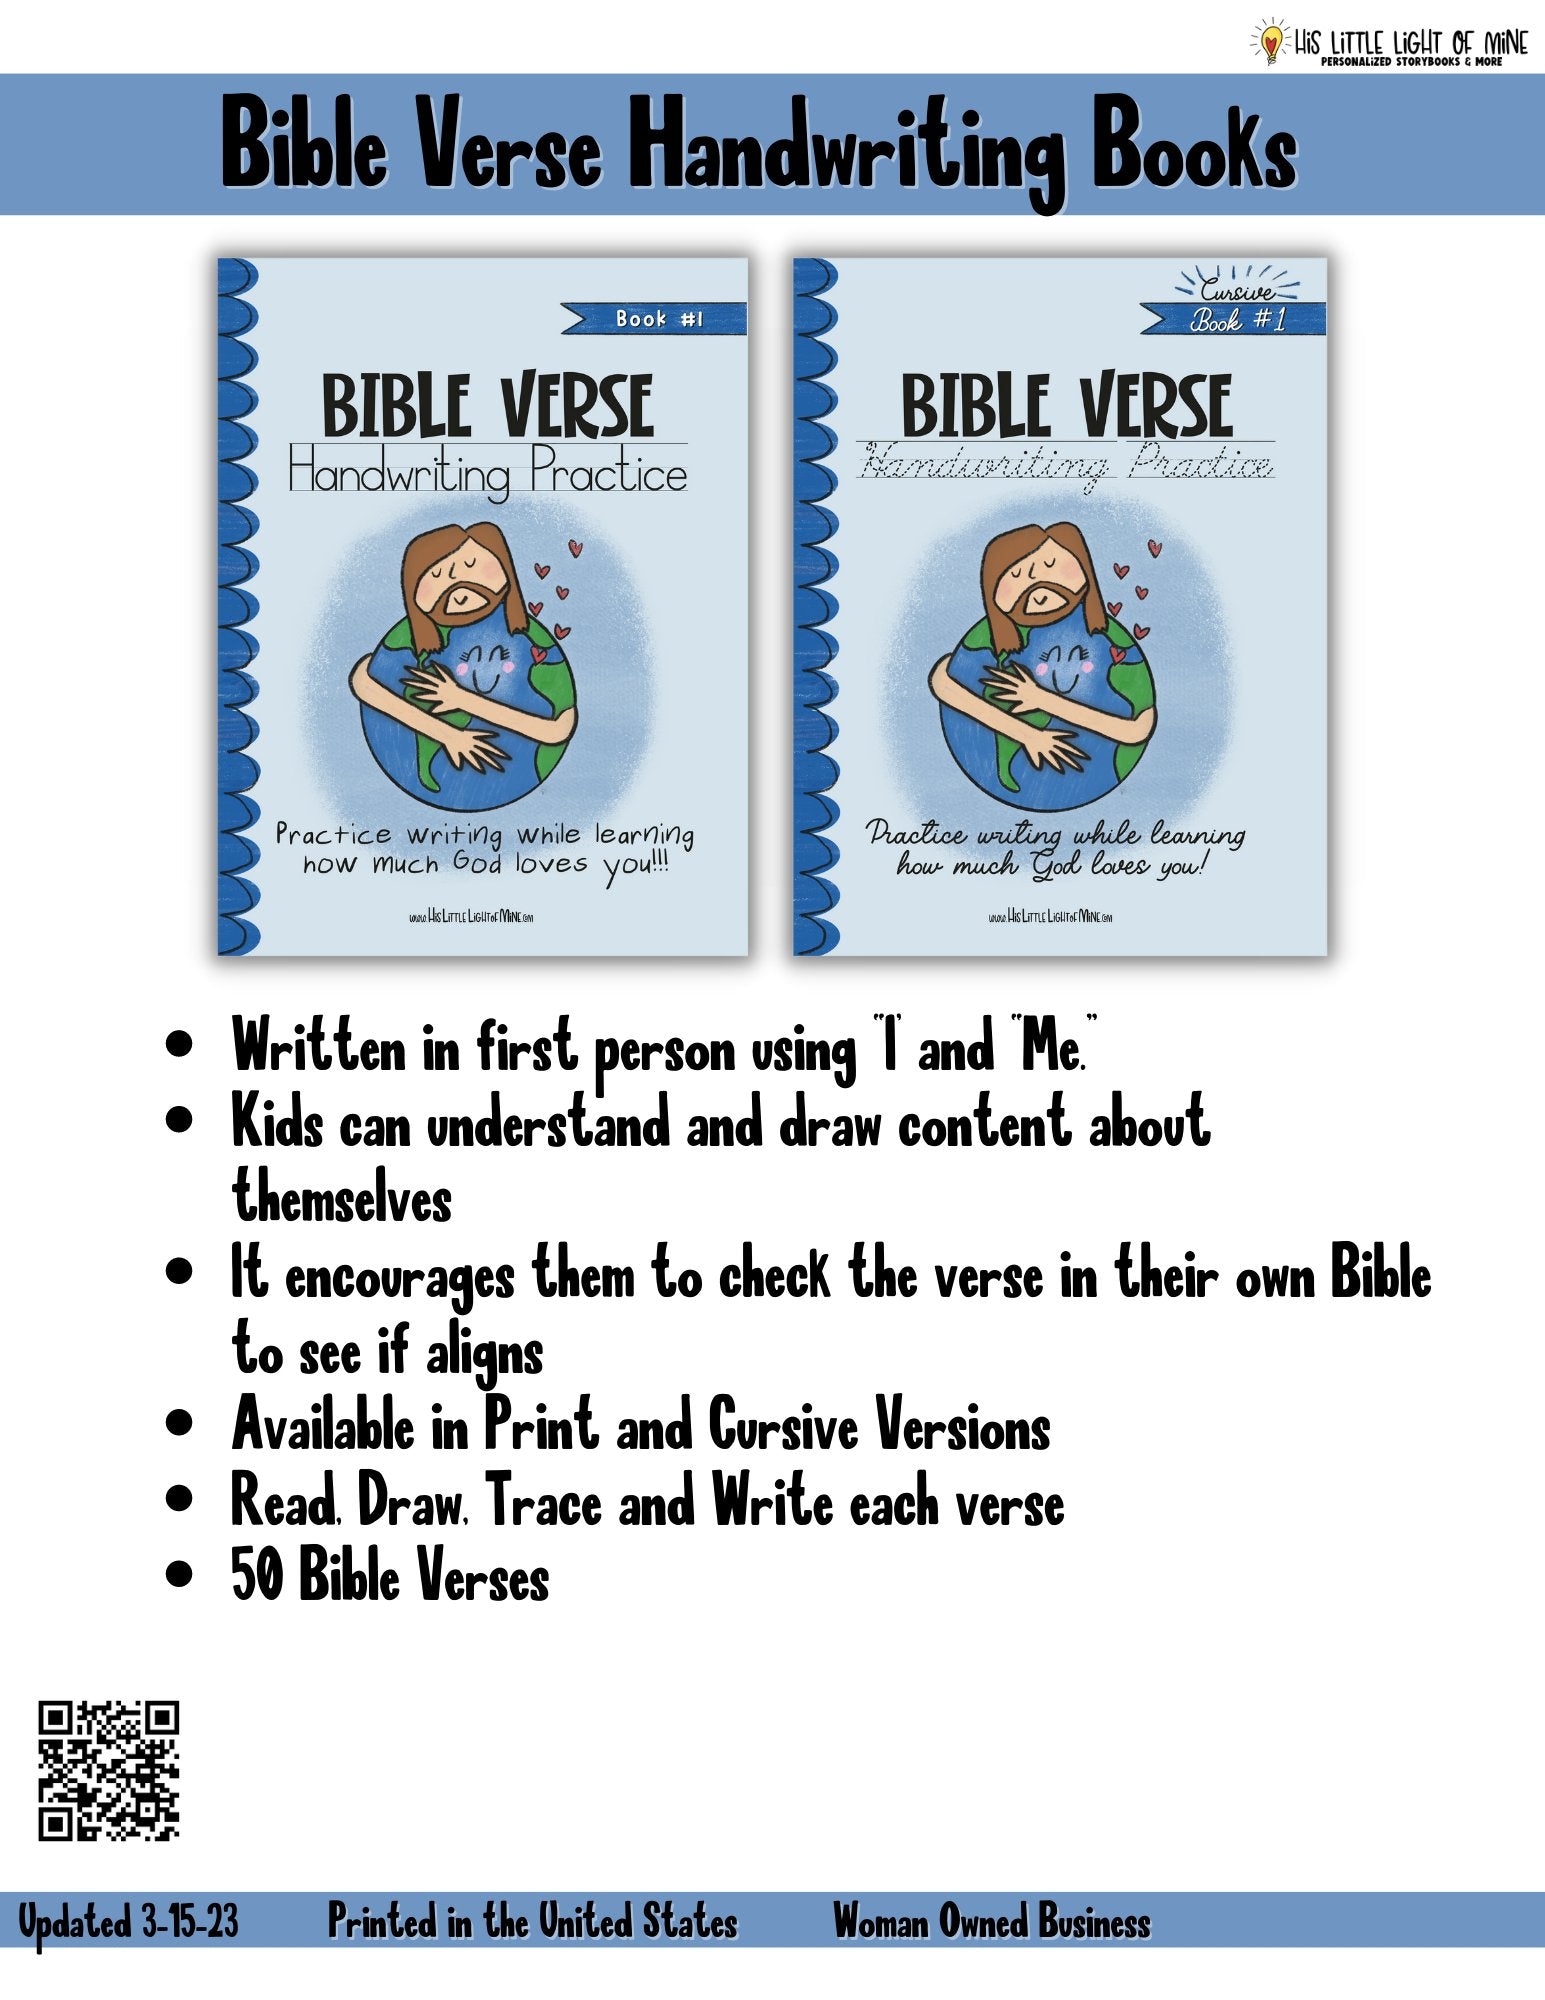 Bulk ad of the Bible Verse Handwriting Books available in both print and cursive, self-published through Amazon Kindle Direct Publishing